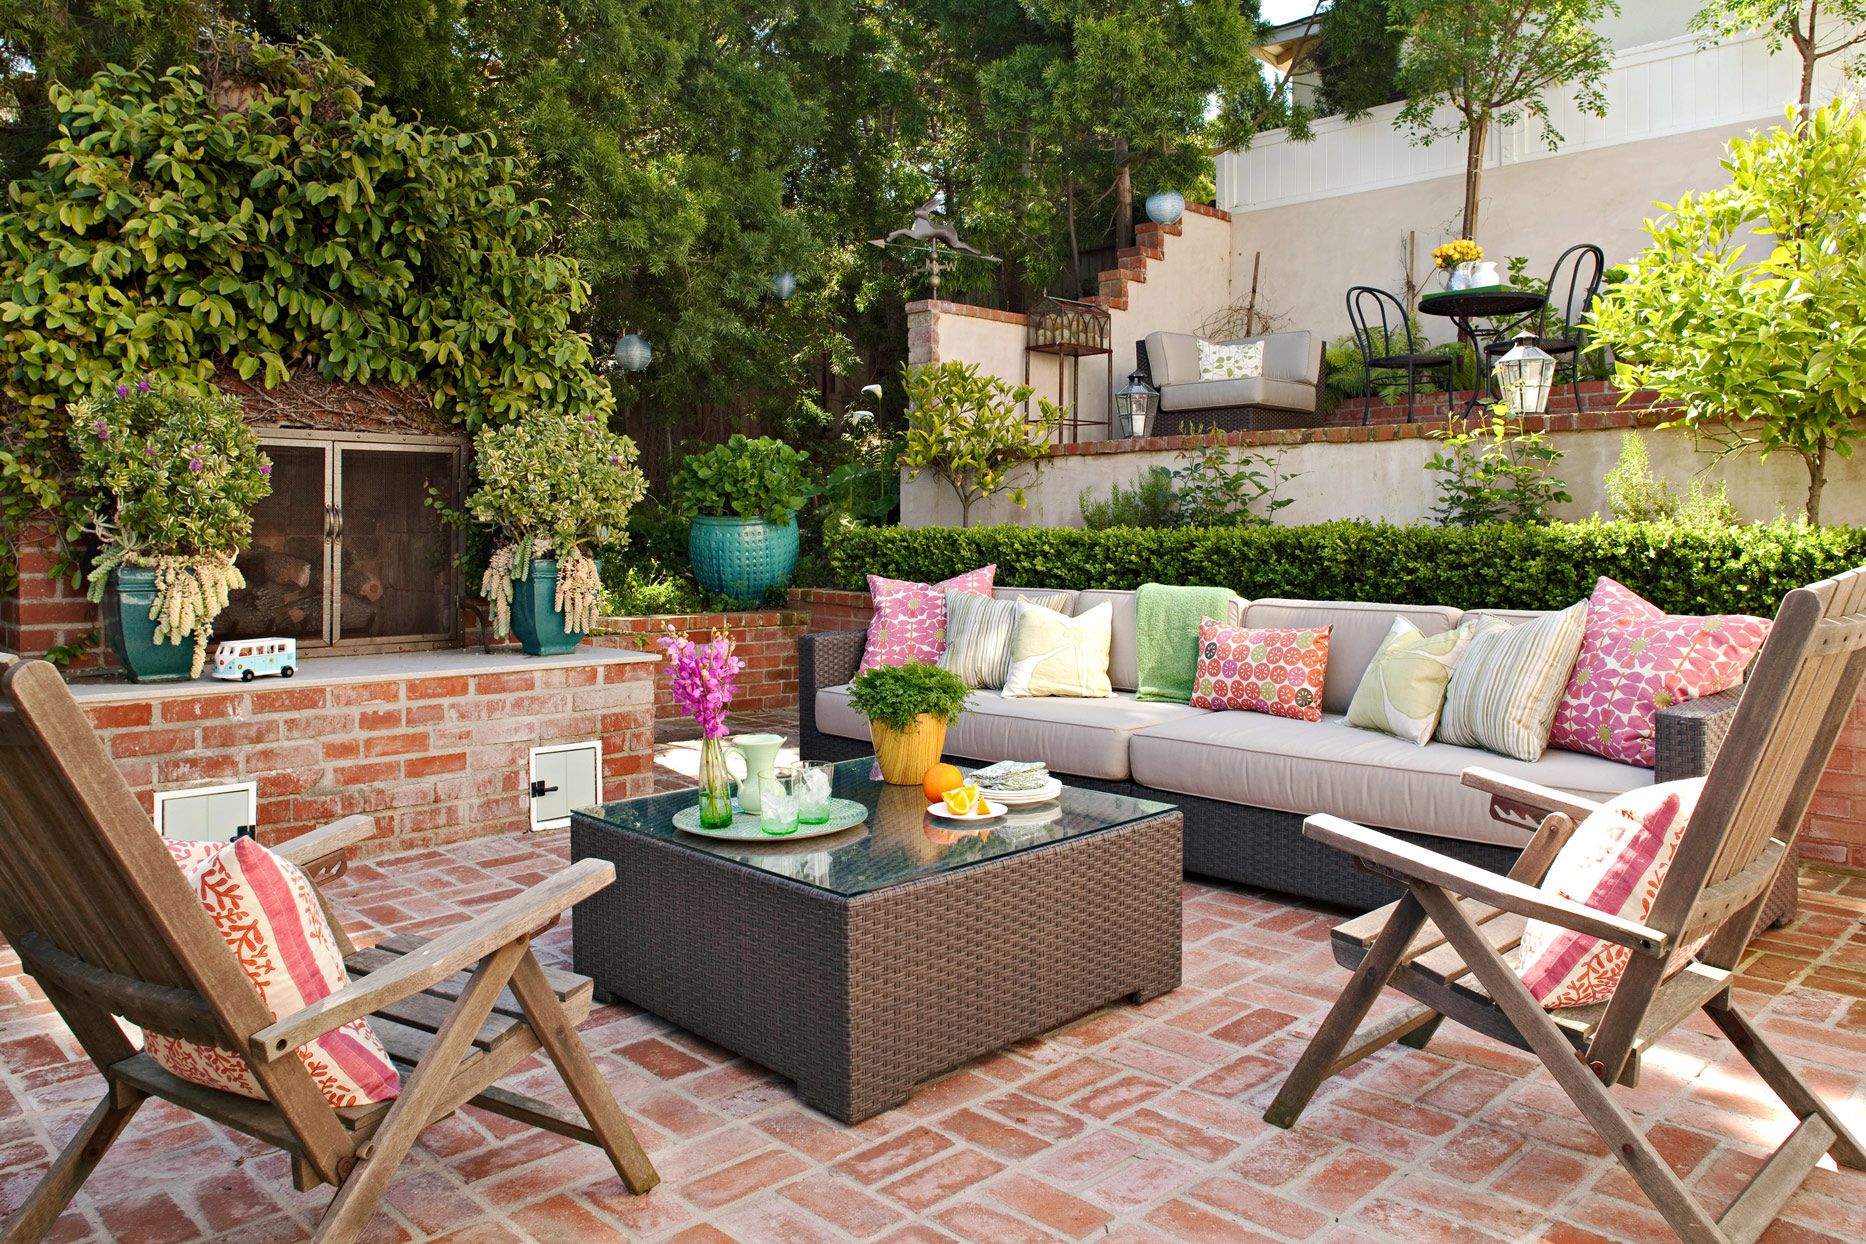 Create a Welcoming and Entertaining Outdoor Living Space with These Ideas